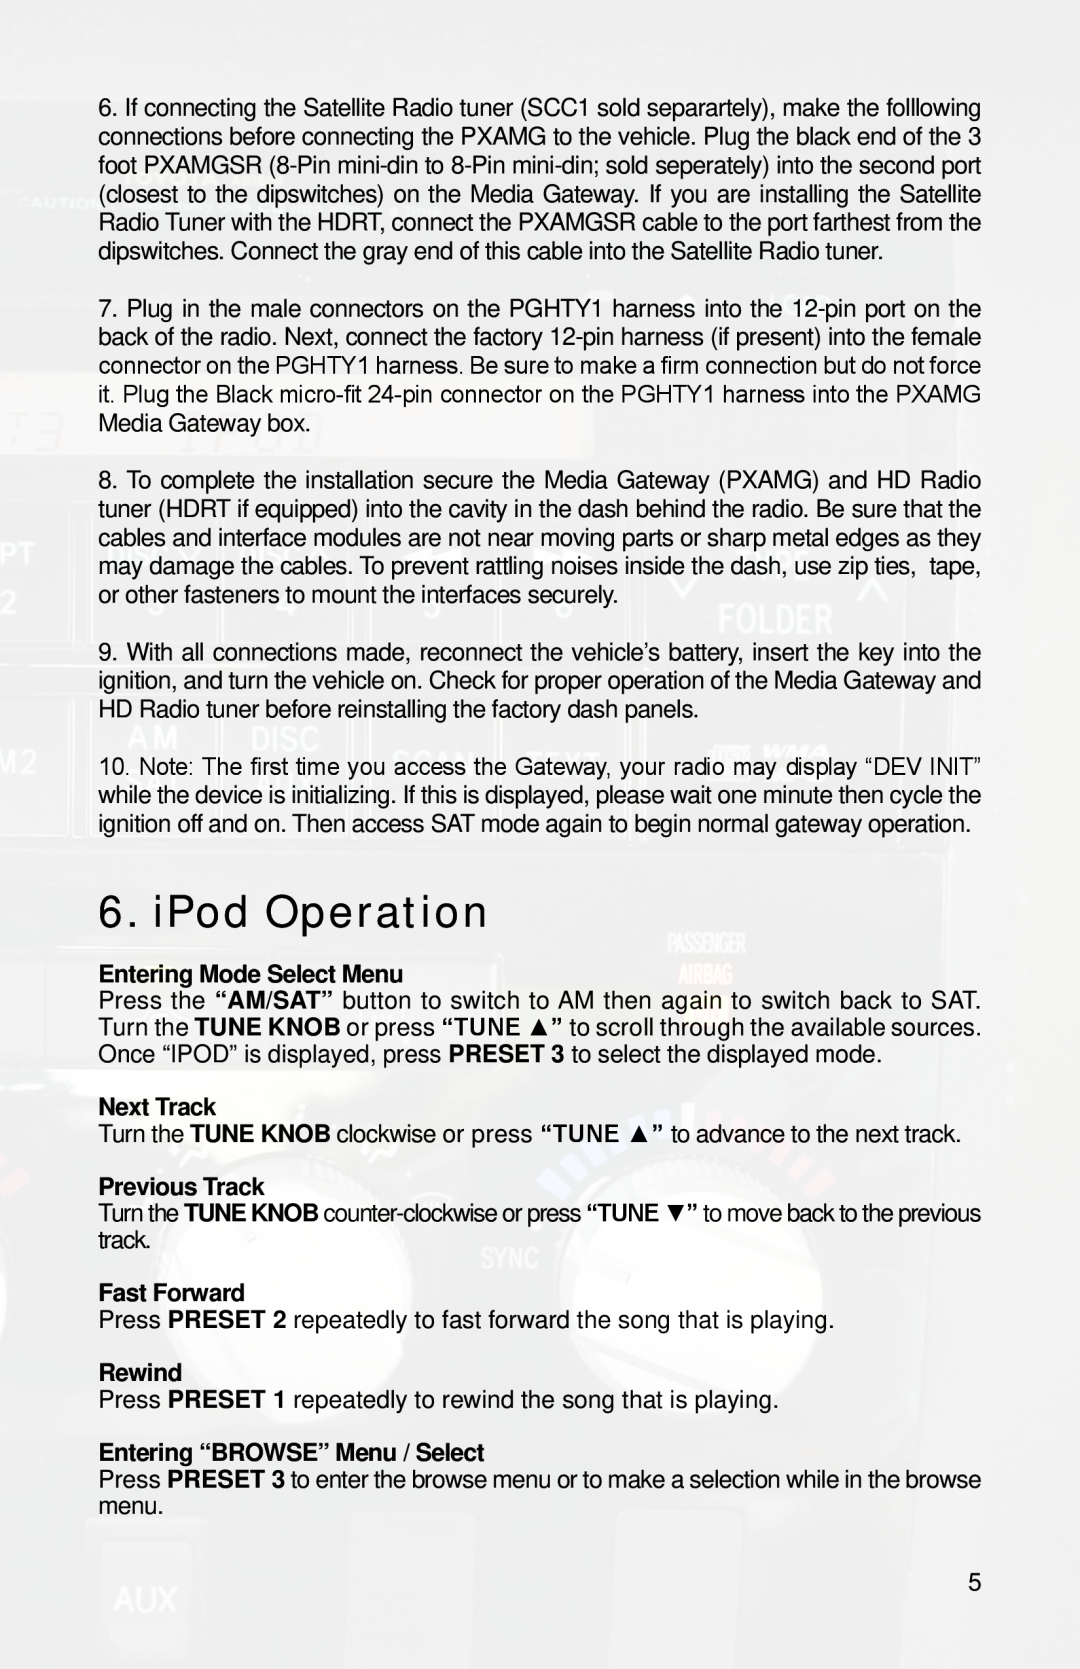 iSimple PGHTY1 owner manual iPod Operation, Entering Mode Select Menu, Next Track, Previous Track, Fast Forward, Rewind 